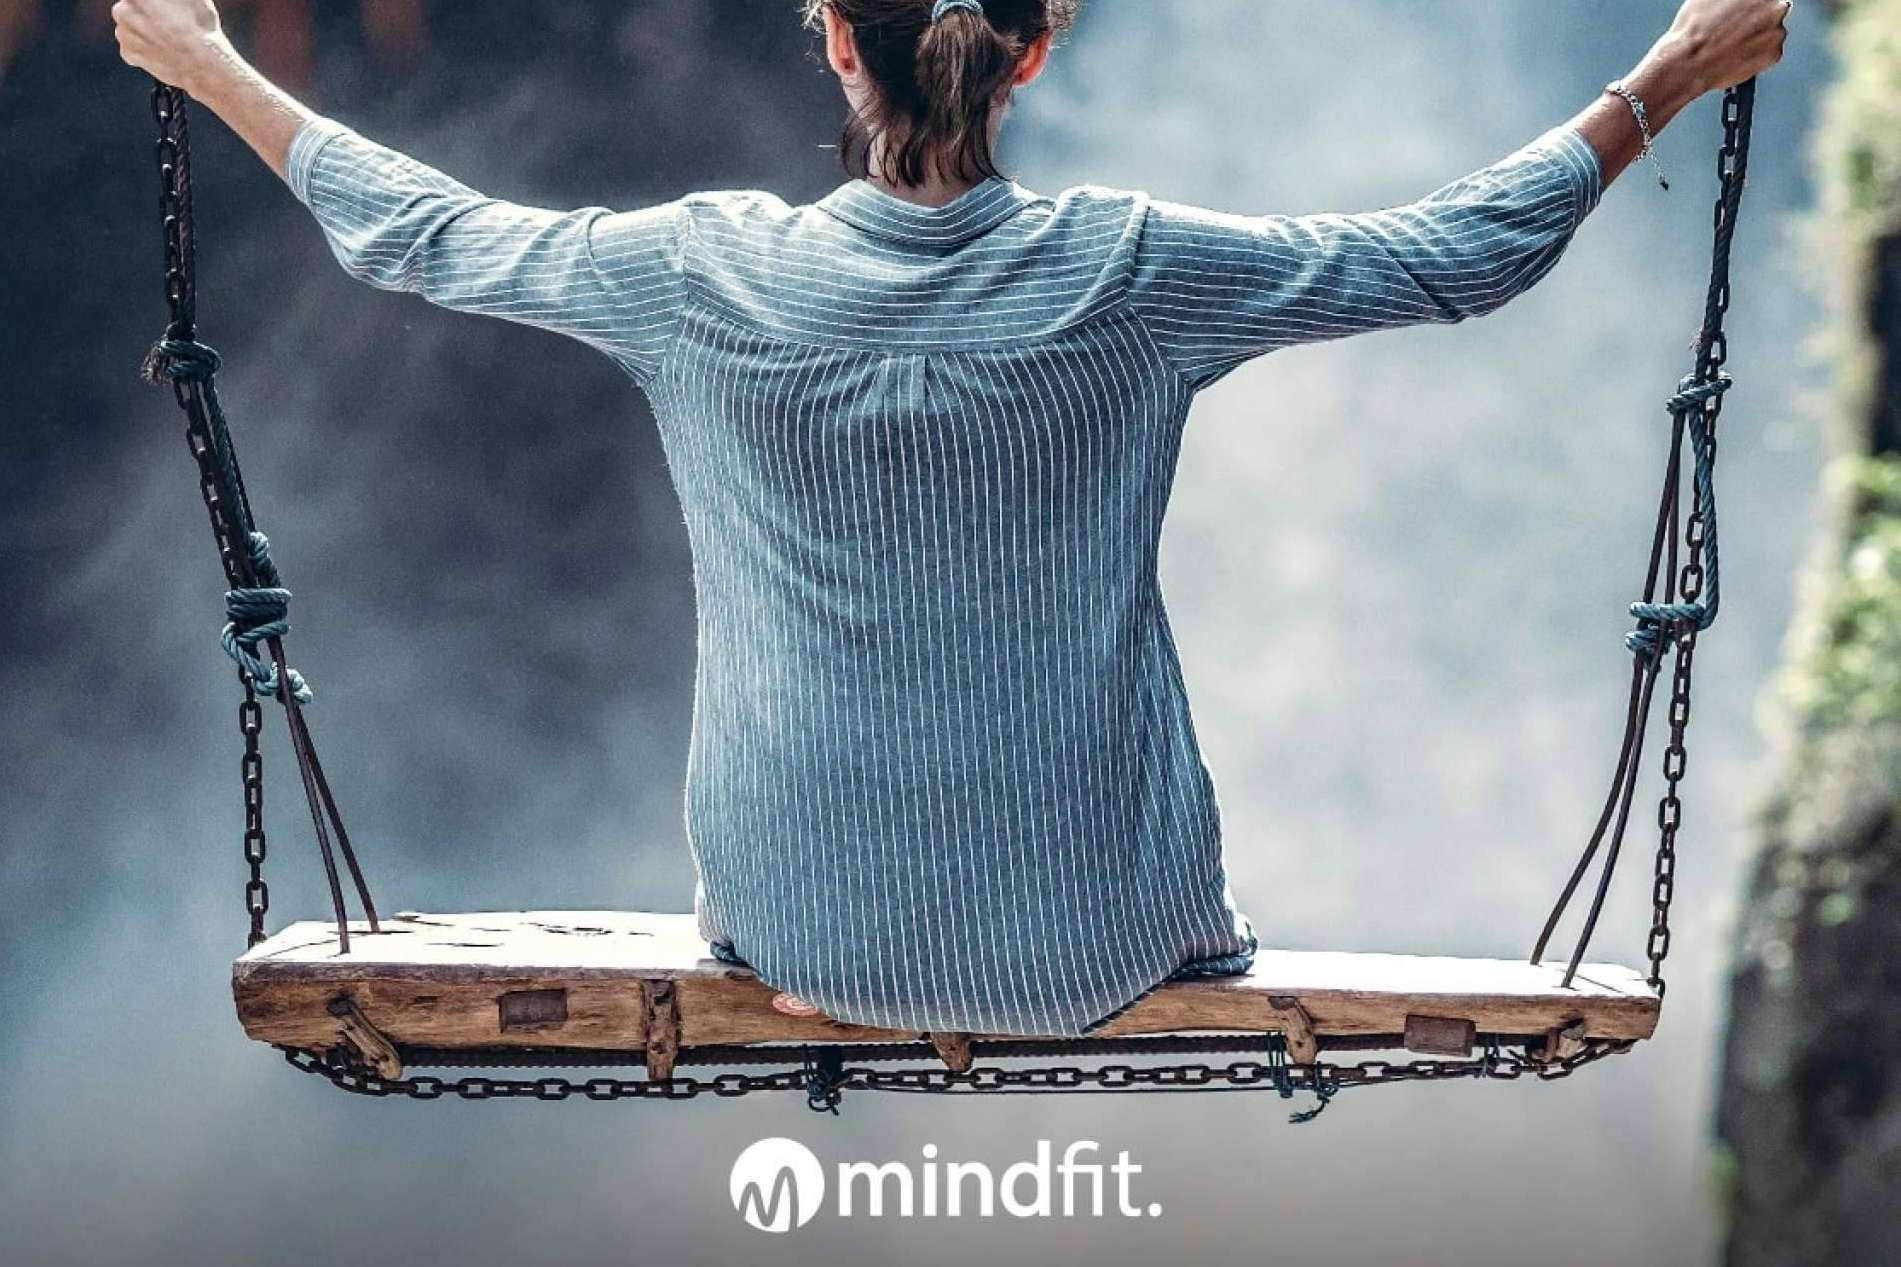 MindFit, the platform that is changing the concept of corporate wellness